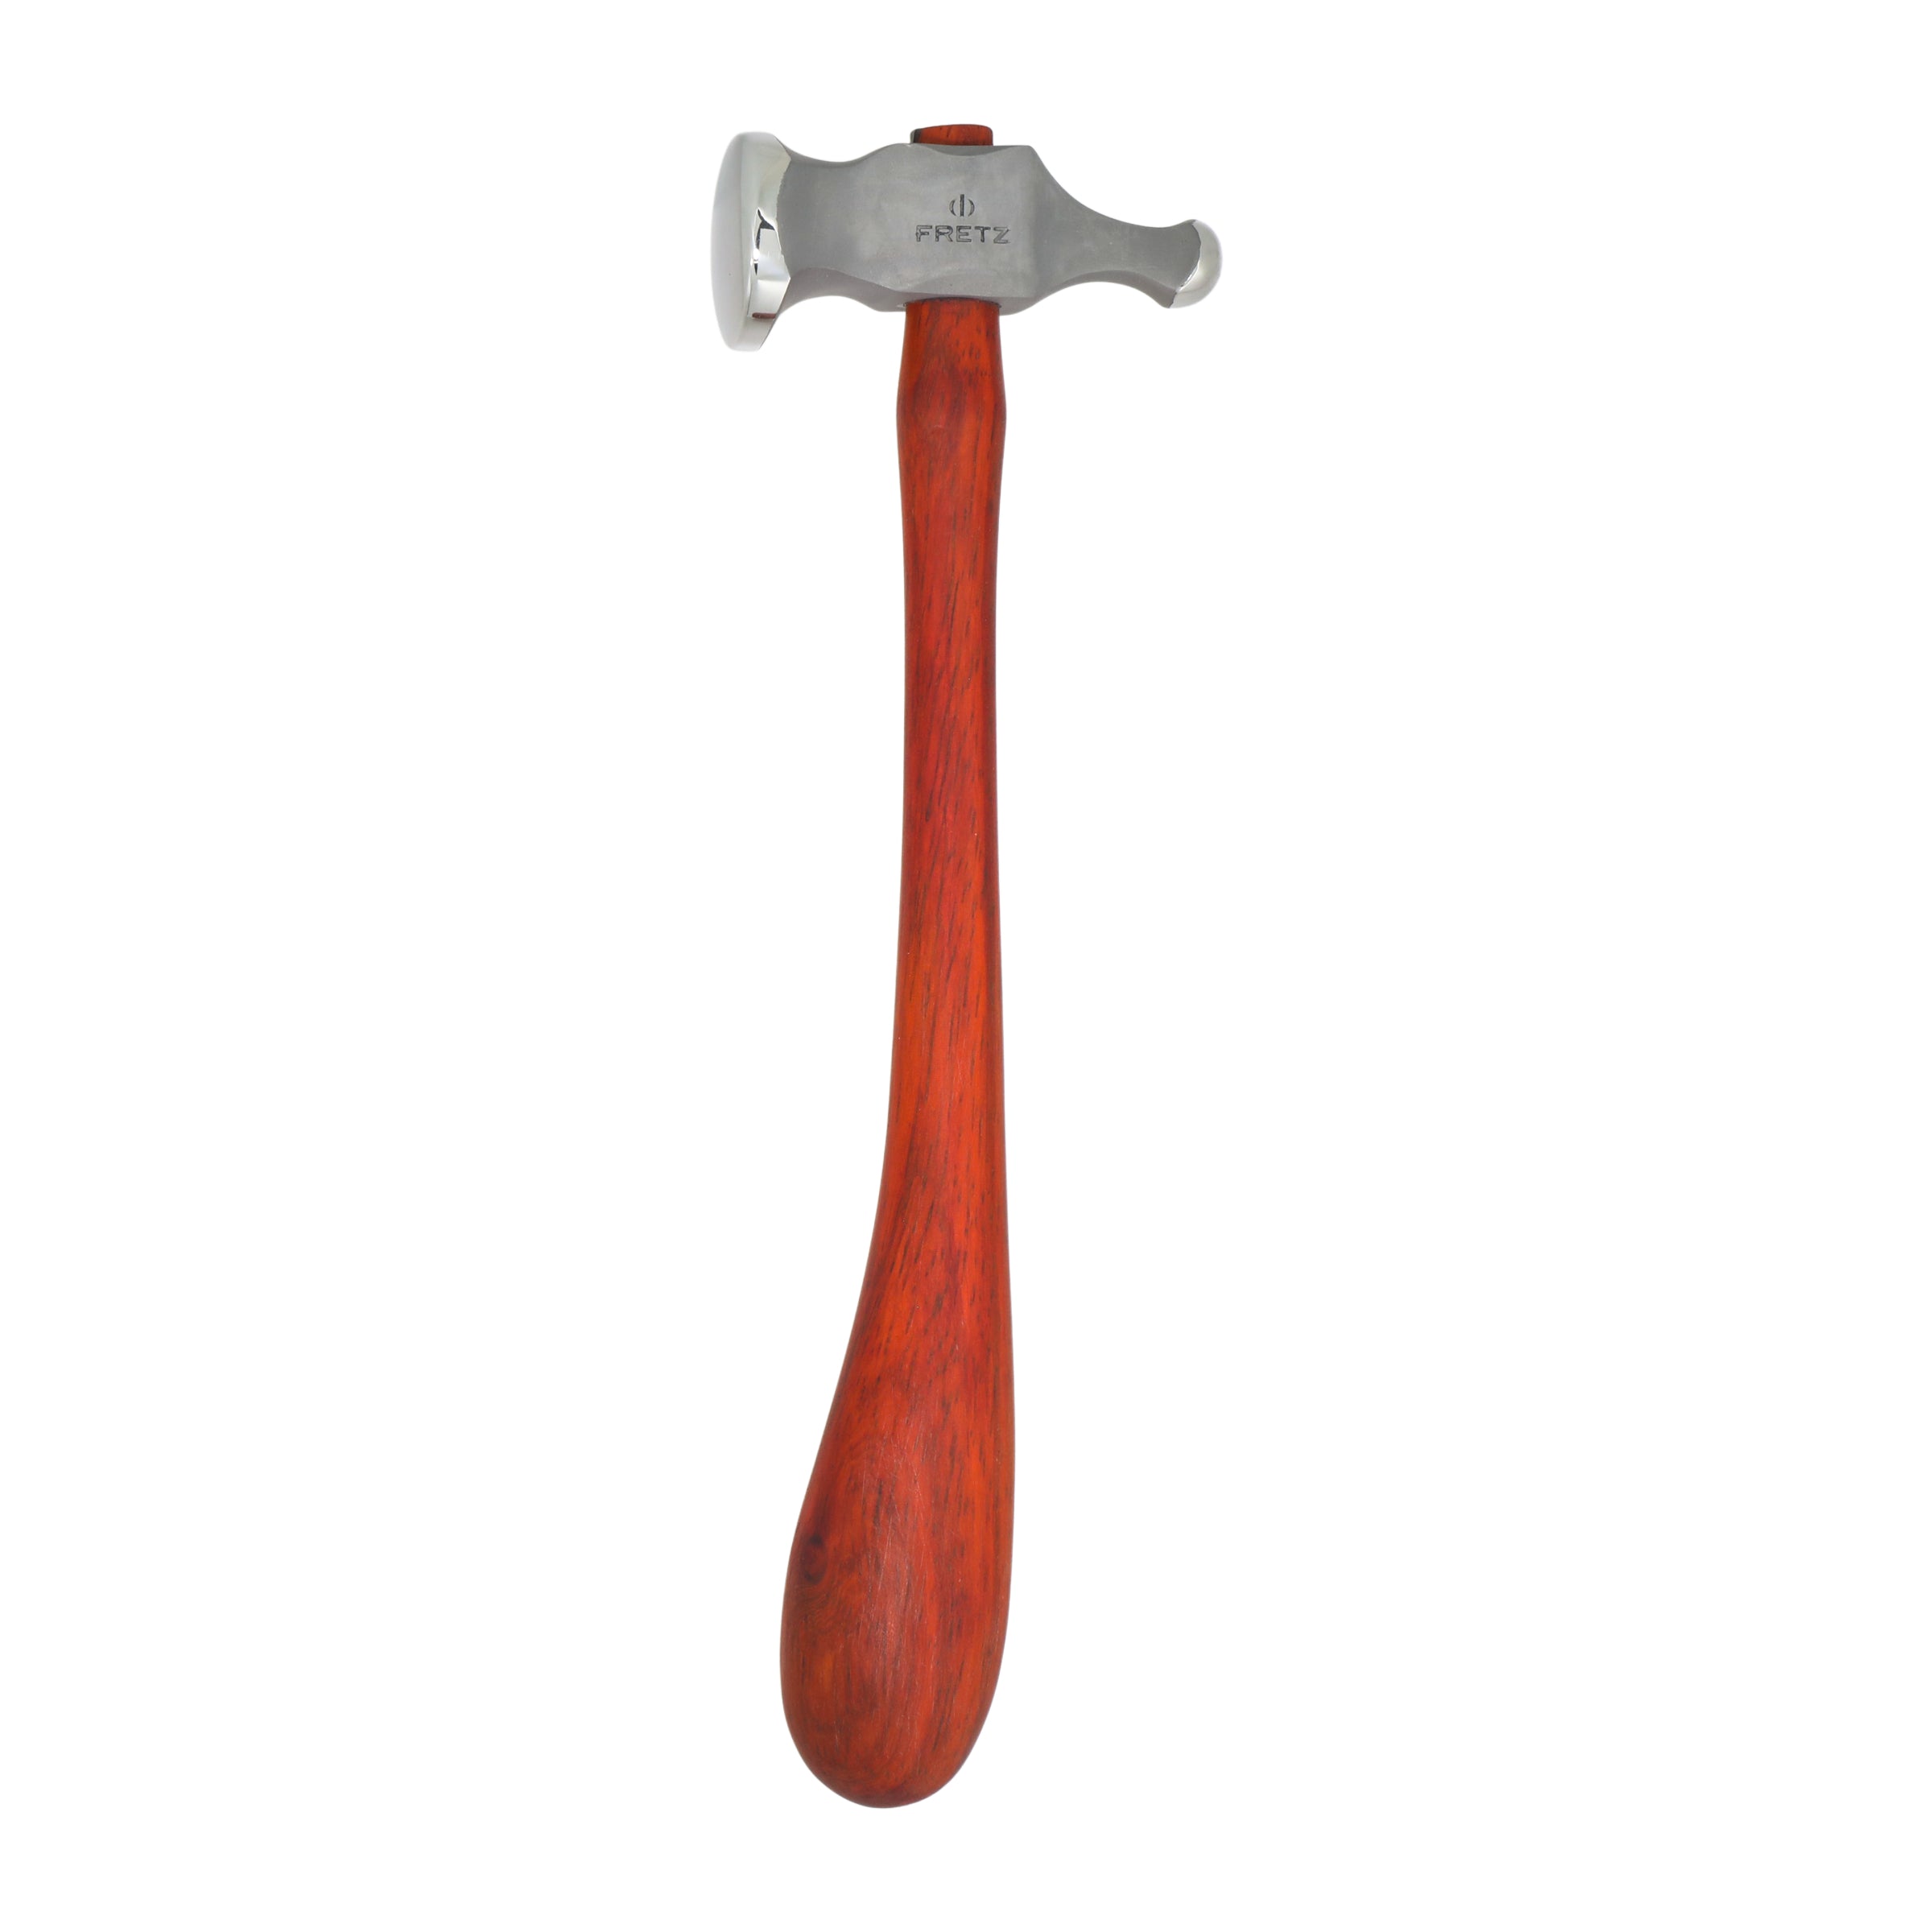 Chasing Hammer 1 inch Flat and Round Head Jewelers Hammer